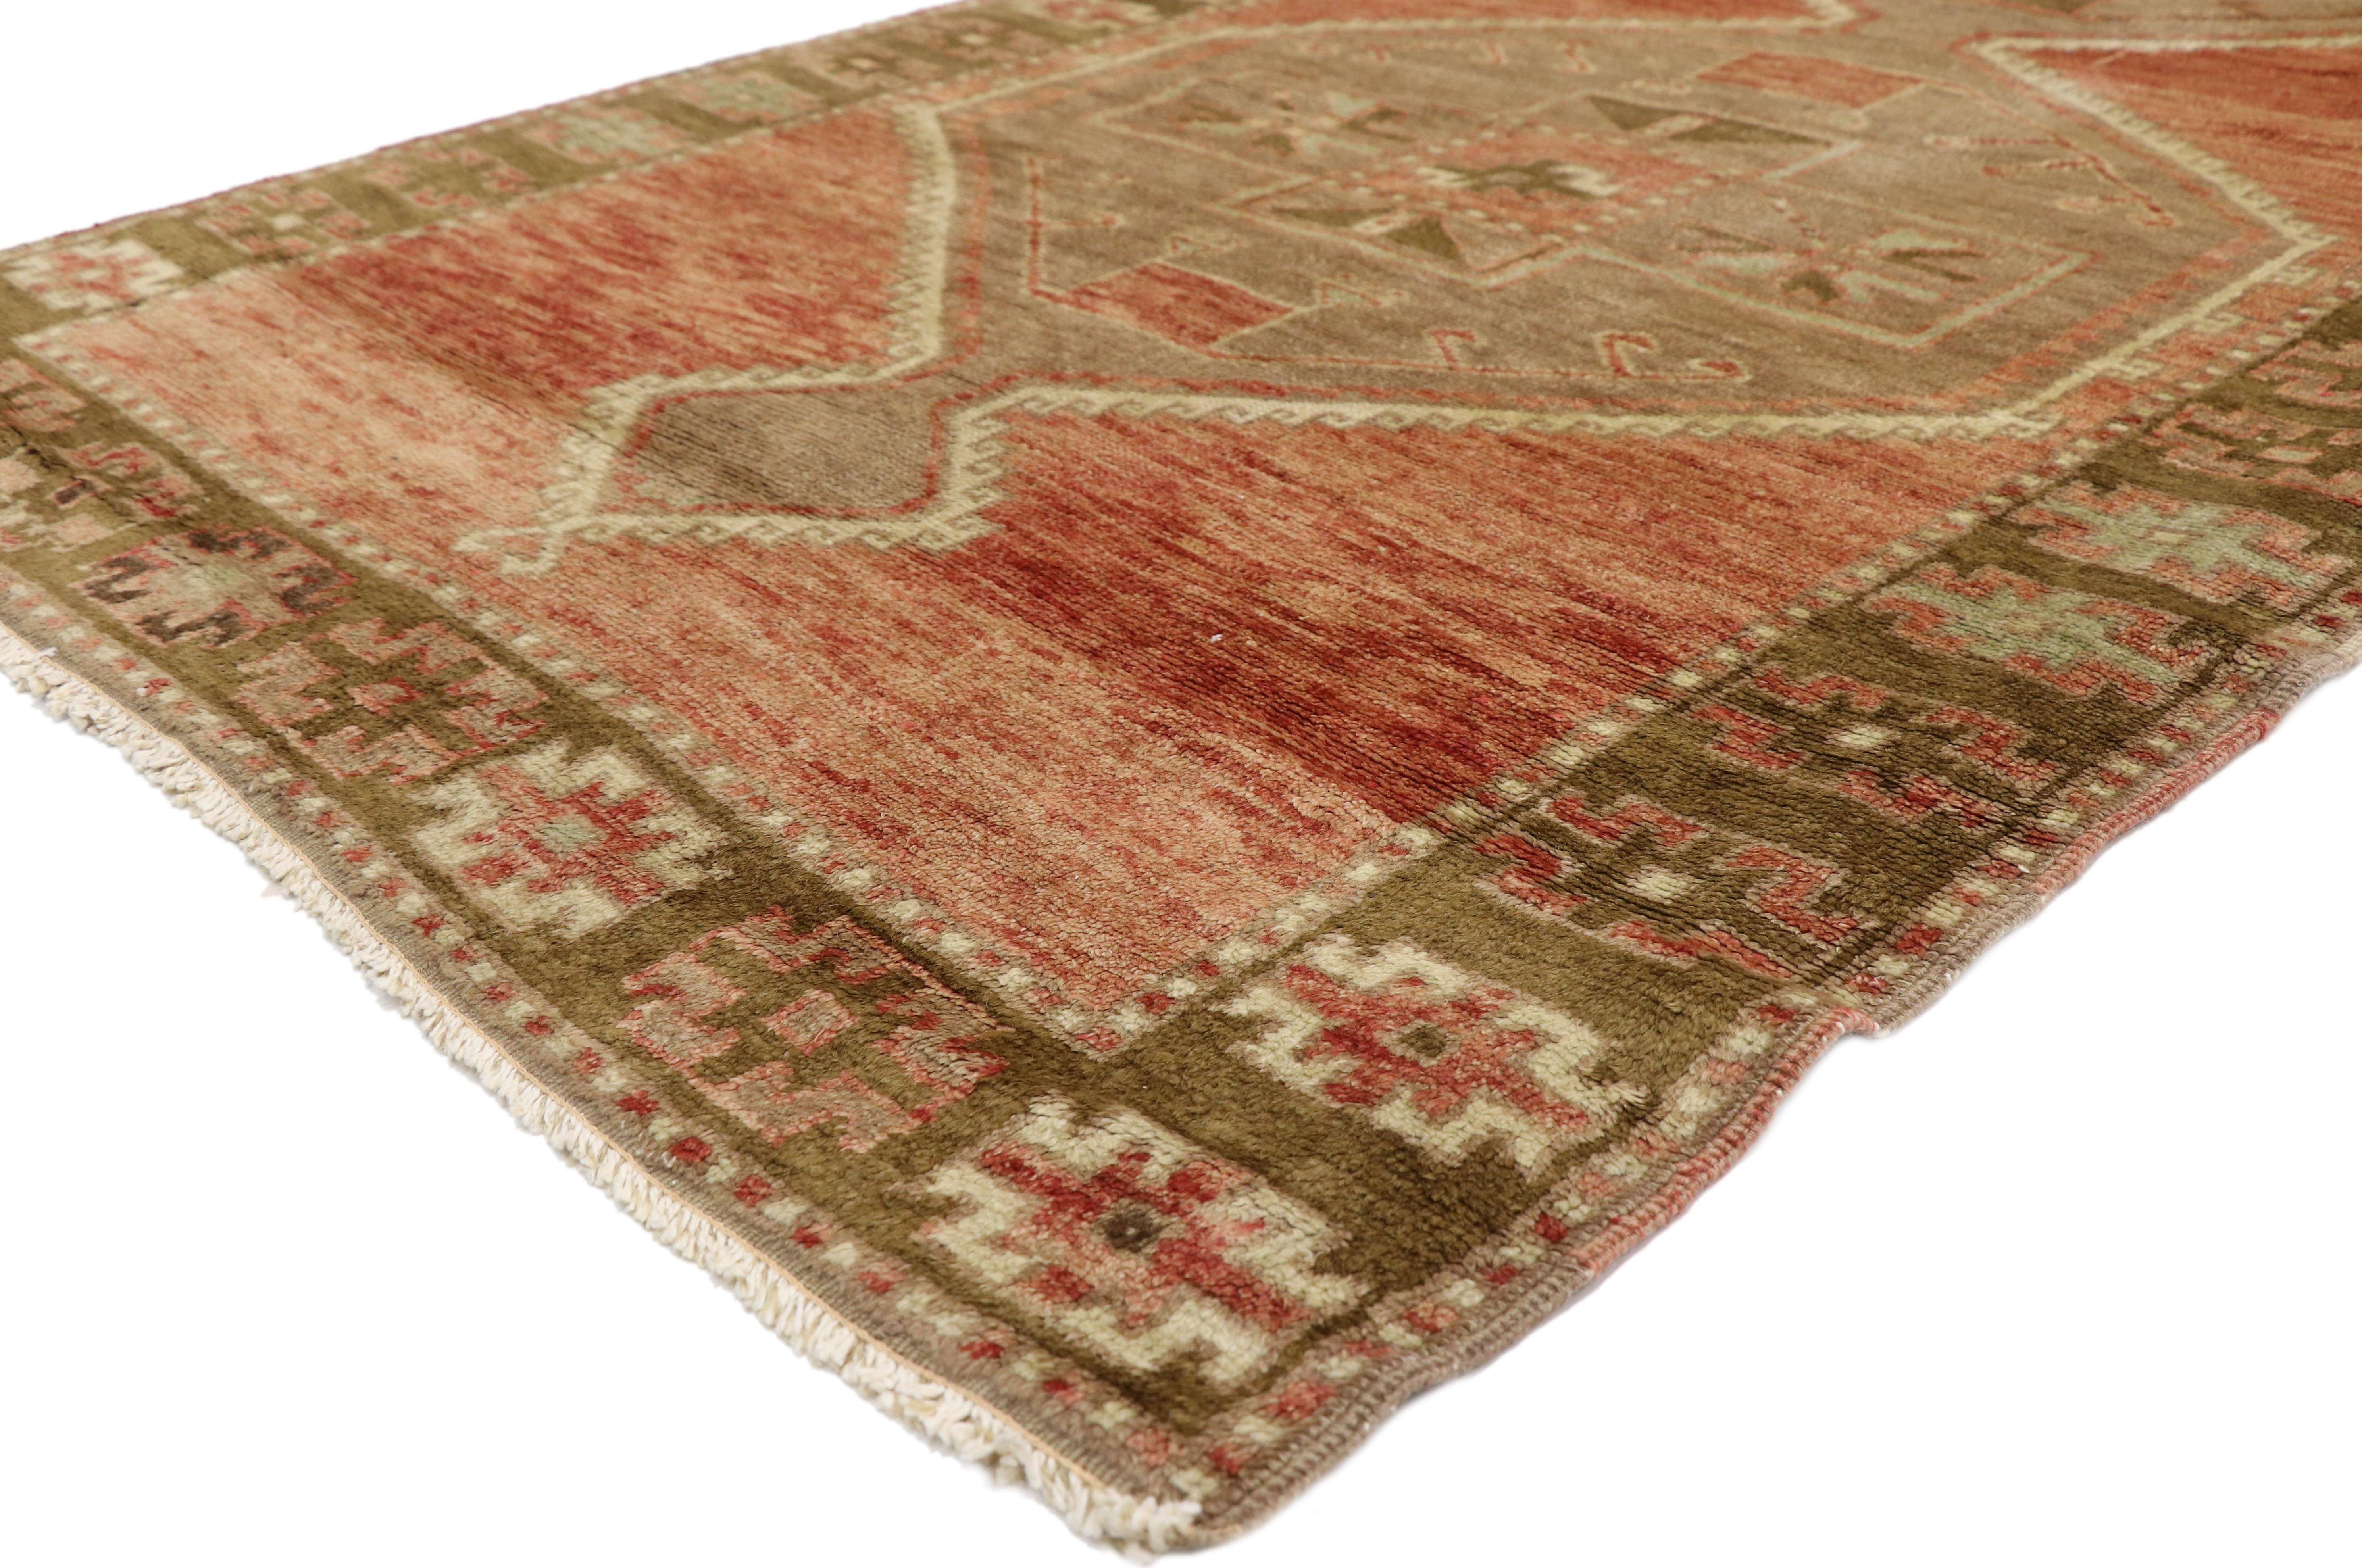 50442-50443 Pair of Vintage Turkish Oushak Hallway Runners with Mid-Century Modern Style. This pair of vintage Turkish Oushak carpet runners bring a warm and historical feel with their traditional modern style. Captivating large-scale medallions are